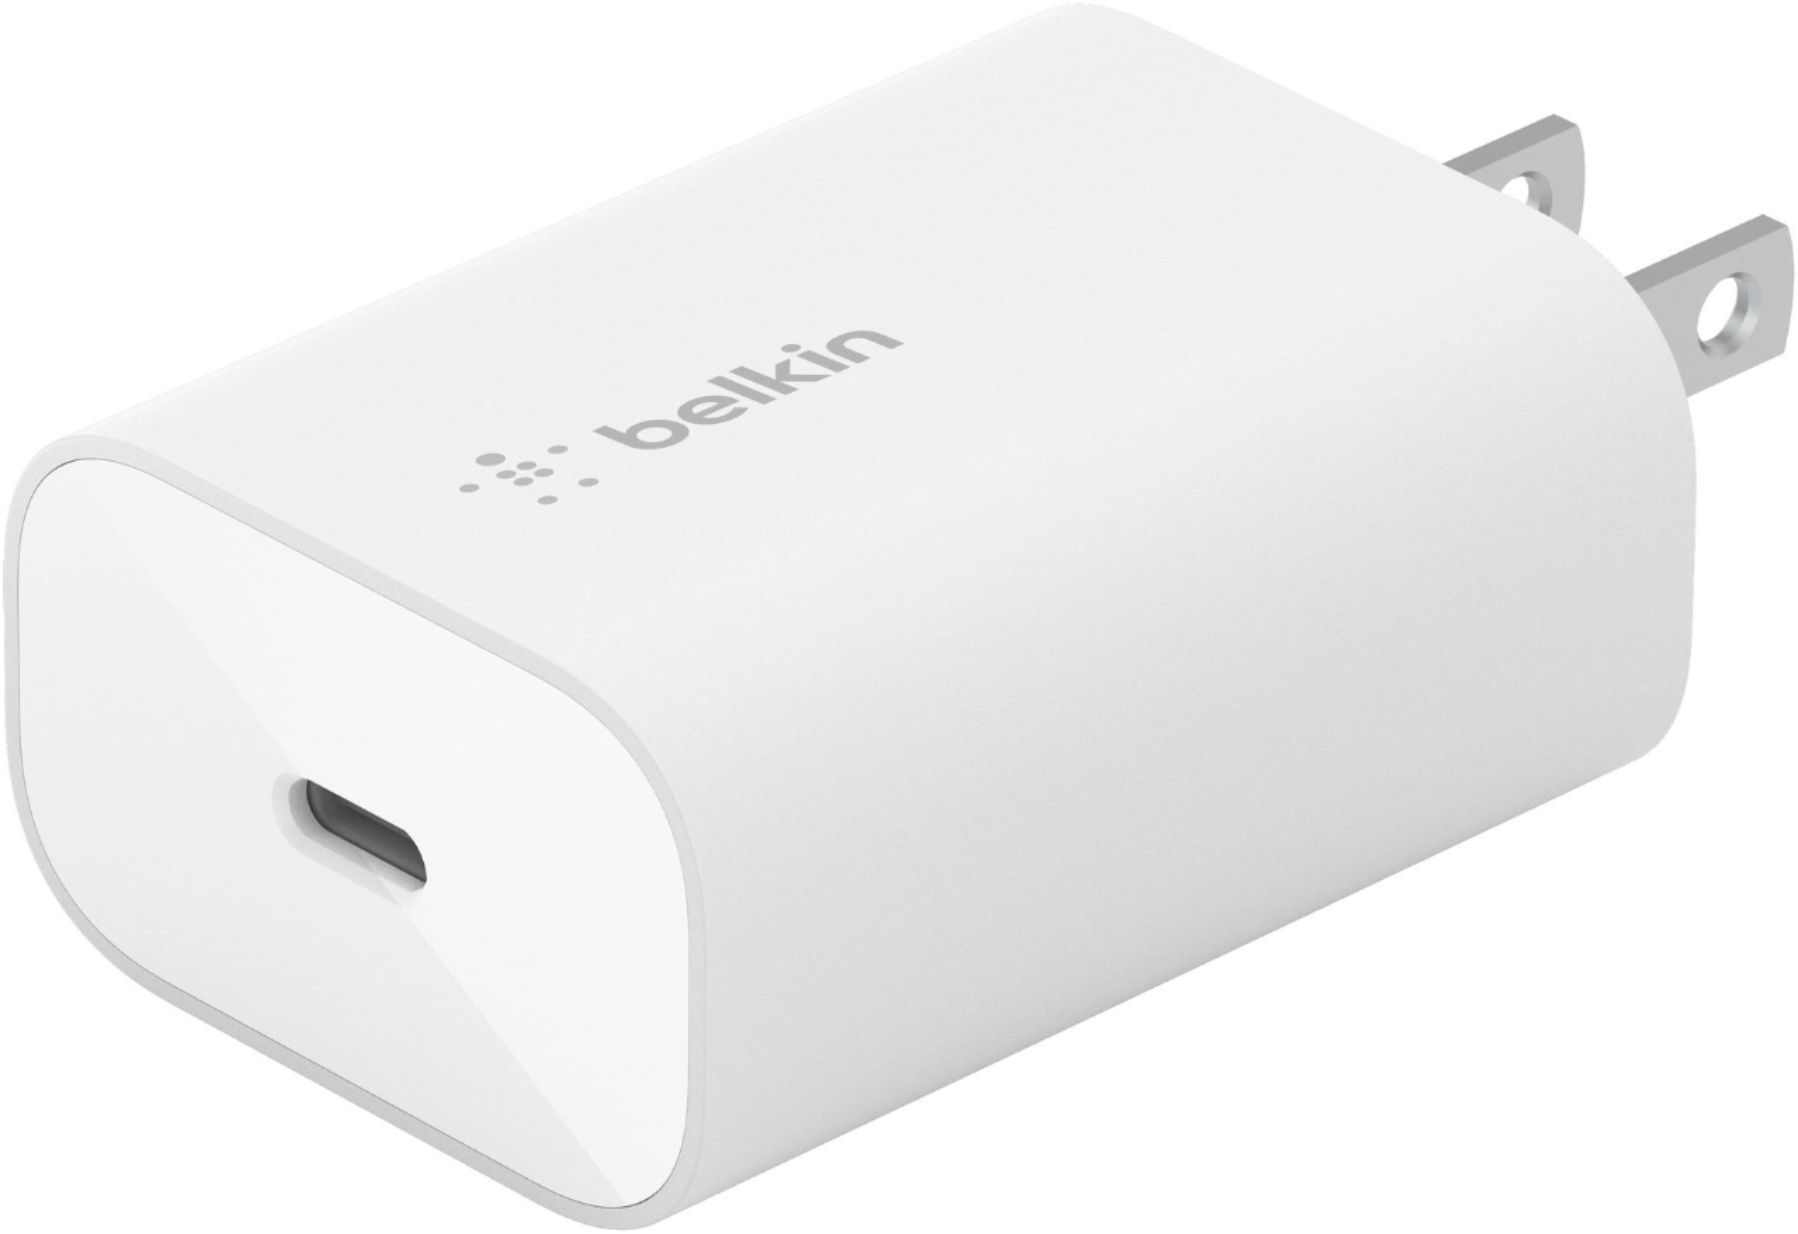 Belkin 24W Dual Port USB Wall Charger with USB C Cable Fast Charging for  iPhone, Galaxy , Pixel & More White WCE001DQ1MWH - Best Buy